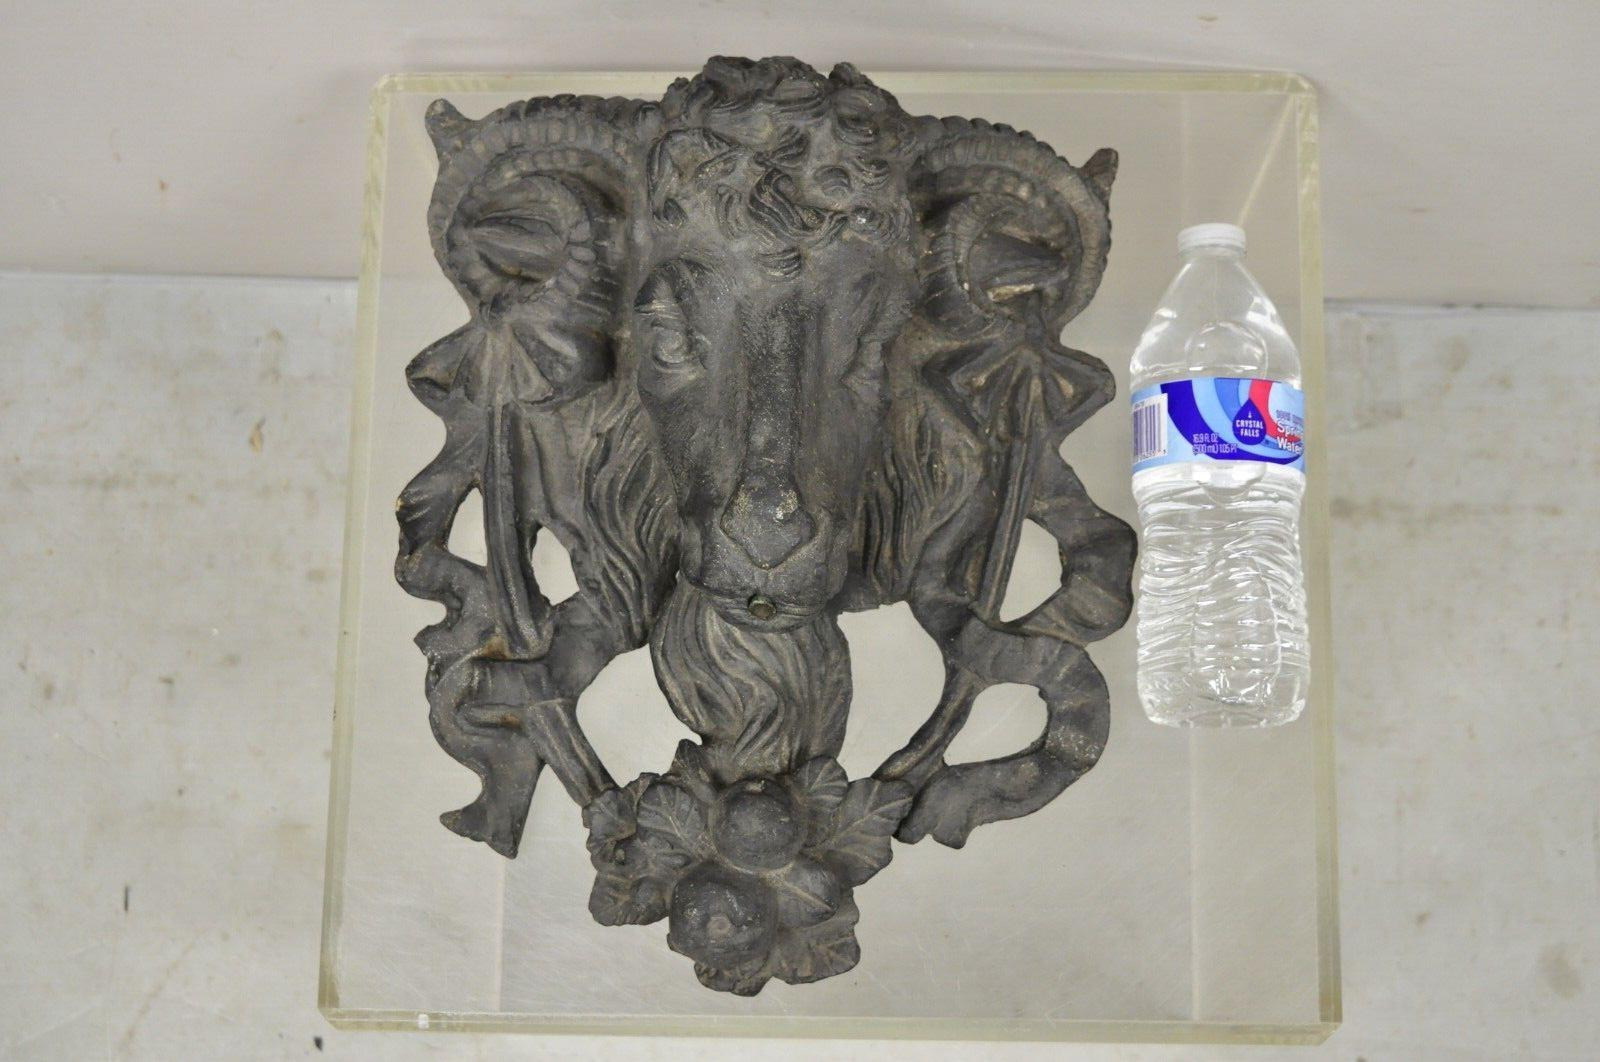 Vintage Rams Head Neoclassical Style Garden Water Fountain Sculpture. Item features Cast ceramic construction, distressed finish, very nice vintage item, great style and form. Circa Mid to Late 20th Century. Measurements: 15